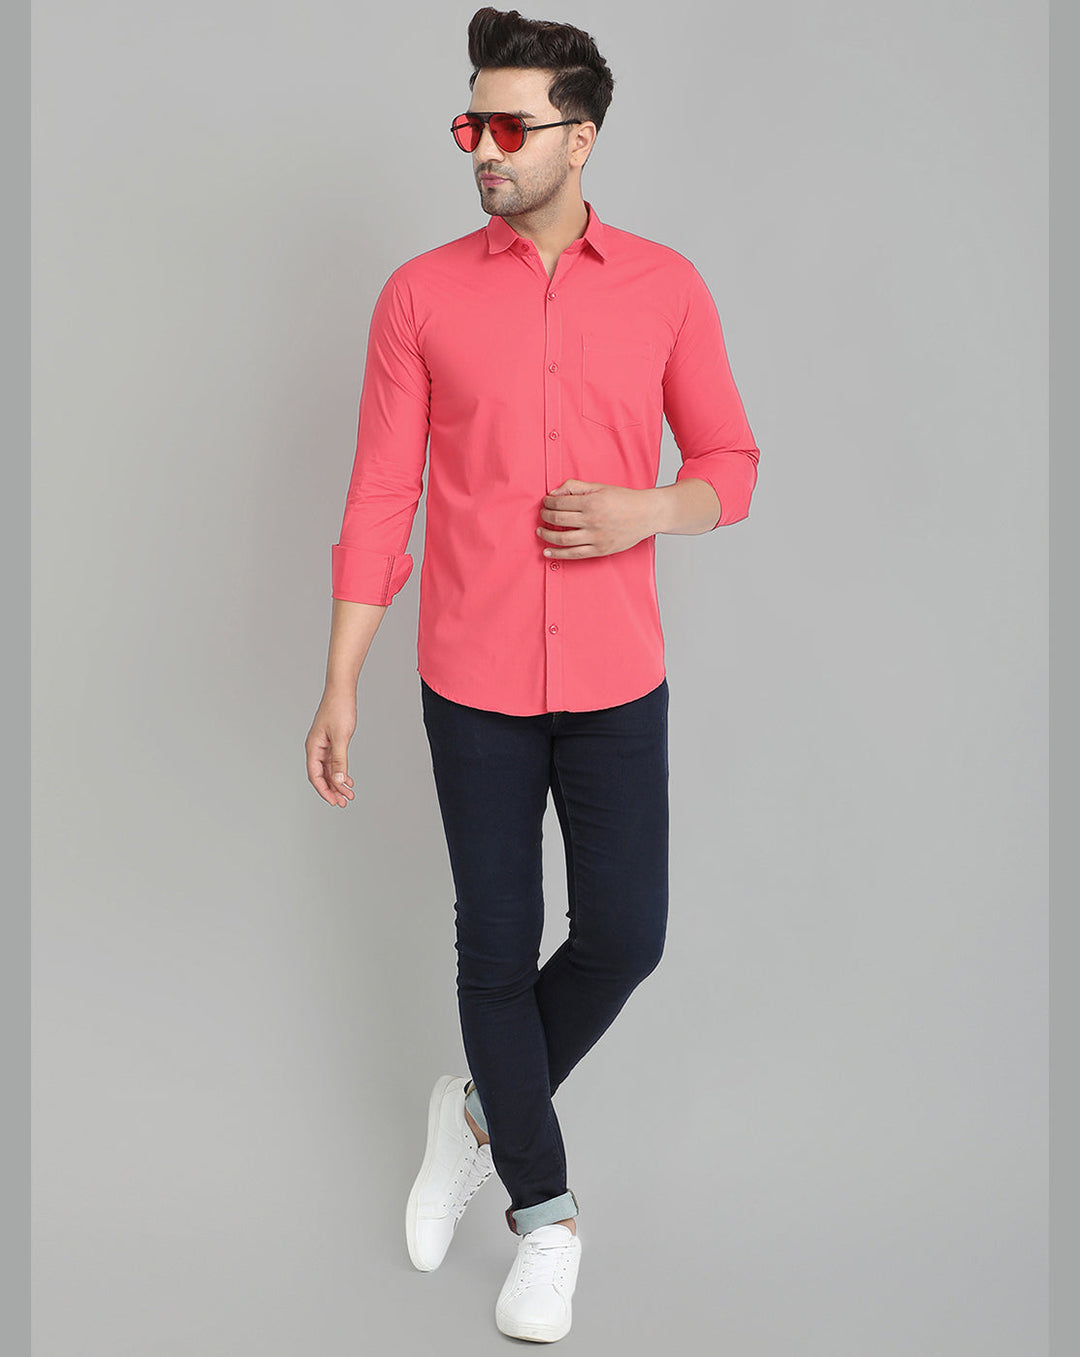 Groovy Pure Cotton Solid shirt - Hot Pink